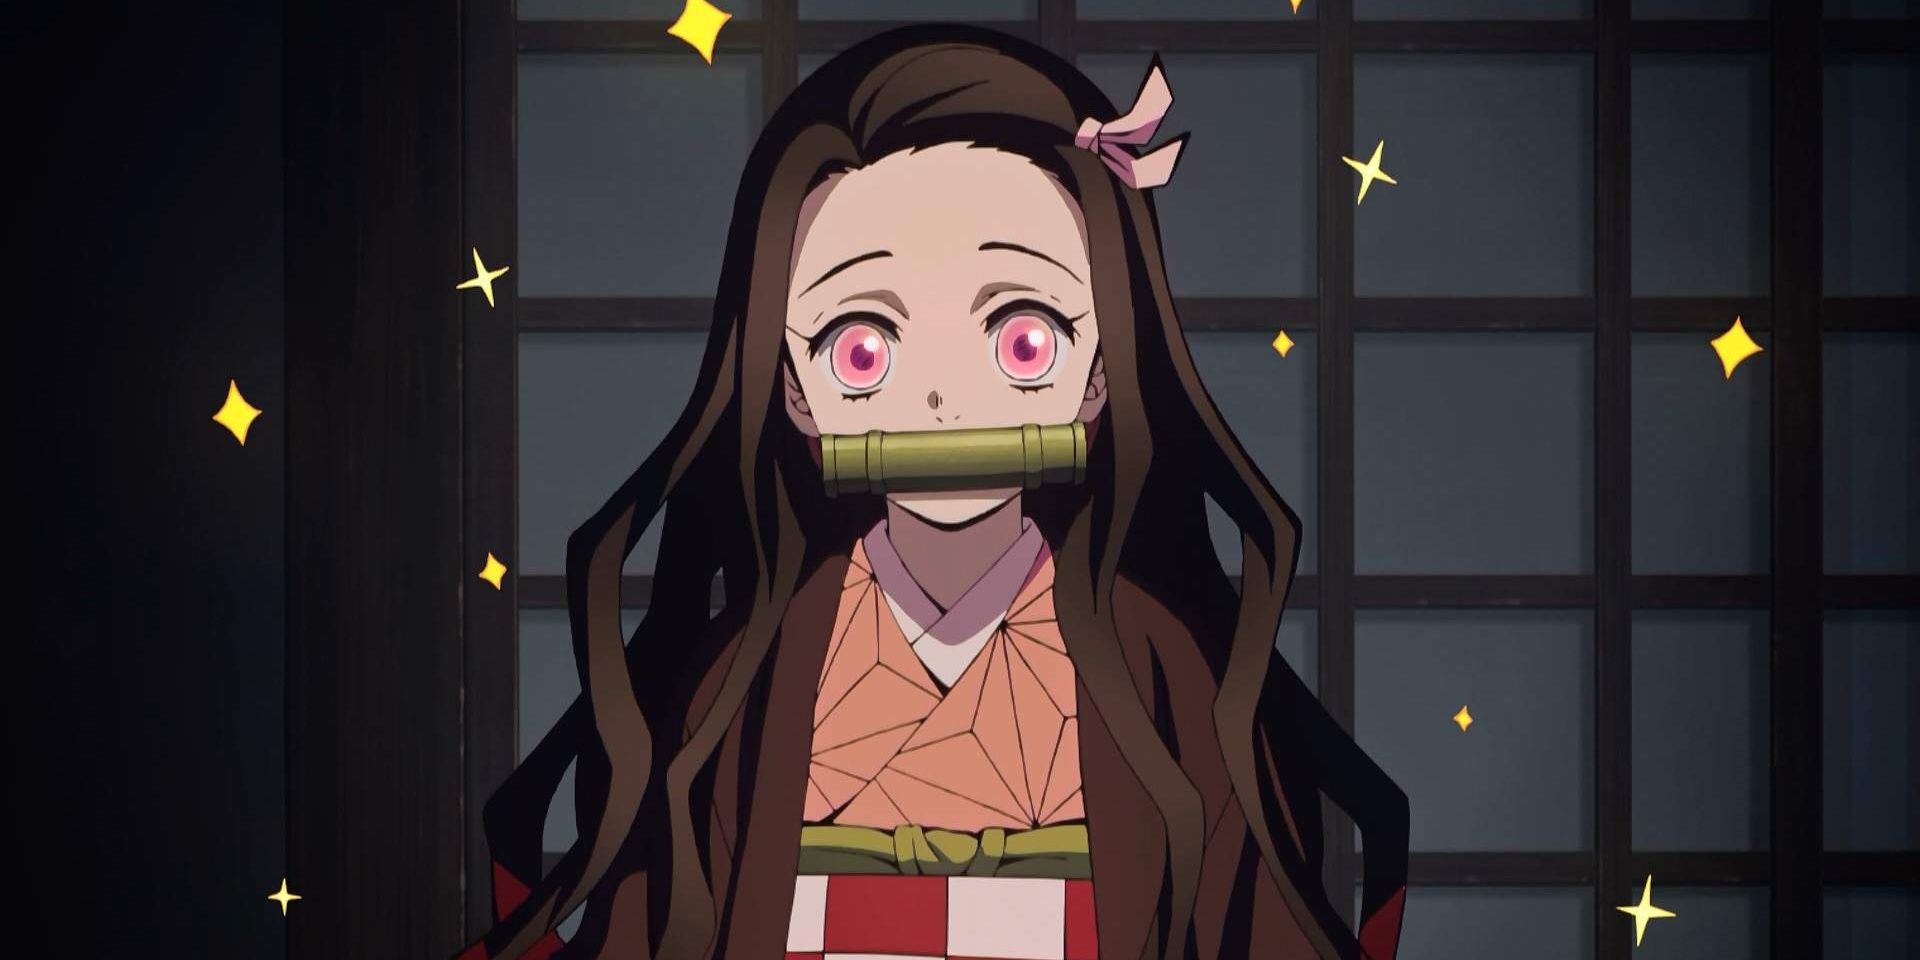 Nezuko sparkling in front of a closed wall partition.